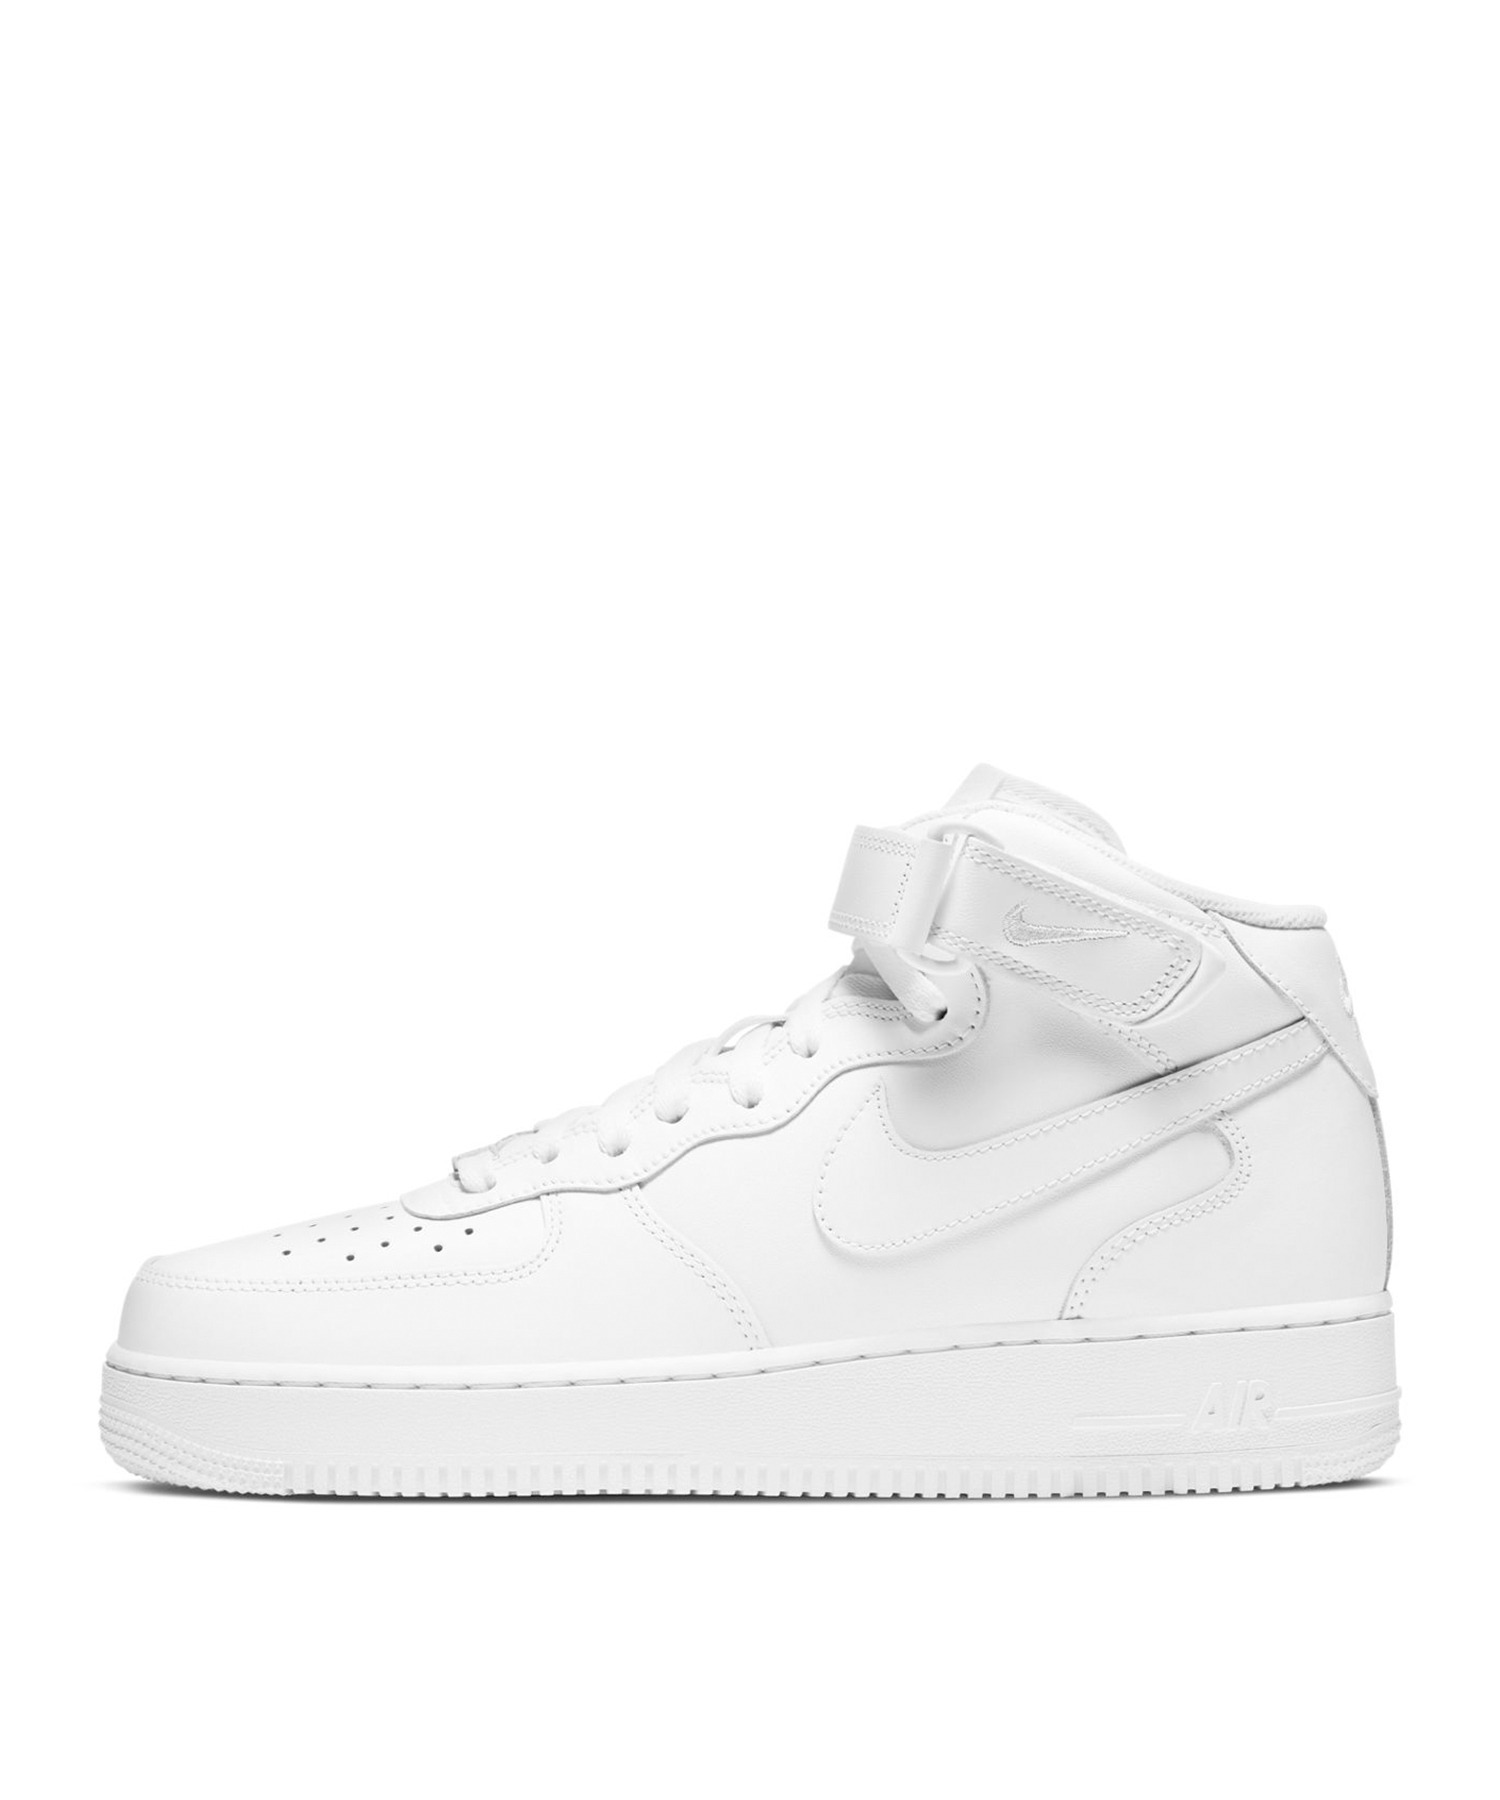 NIKE AIR FORCE 1 MID 07 詳細画像 ホワイト 1